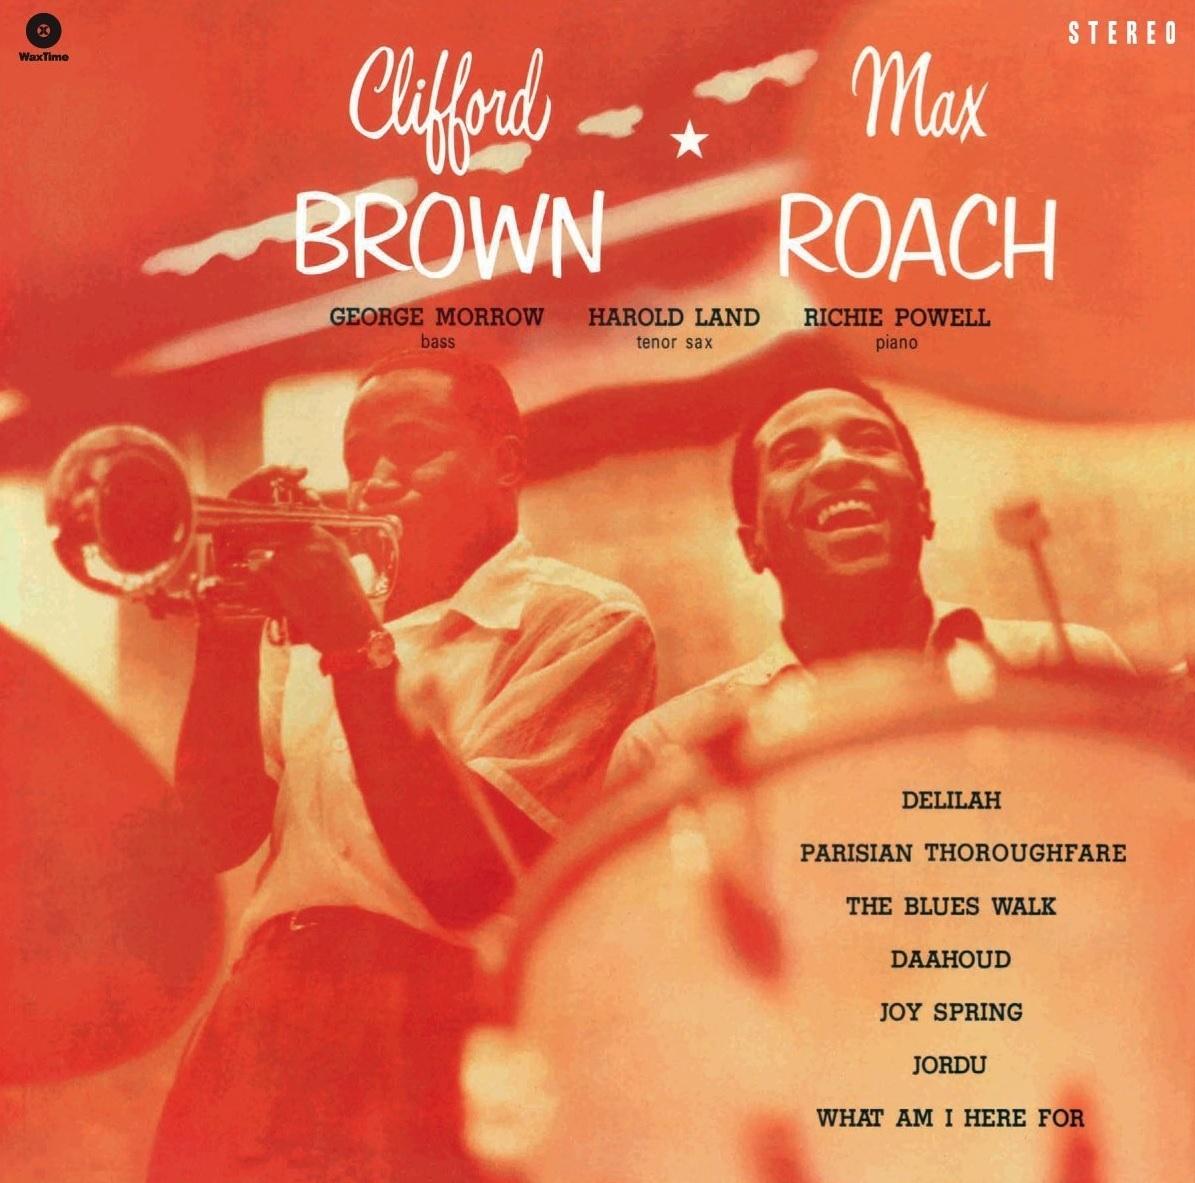 Image result for clifford brown and max roach